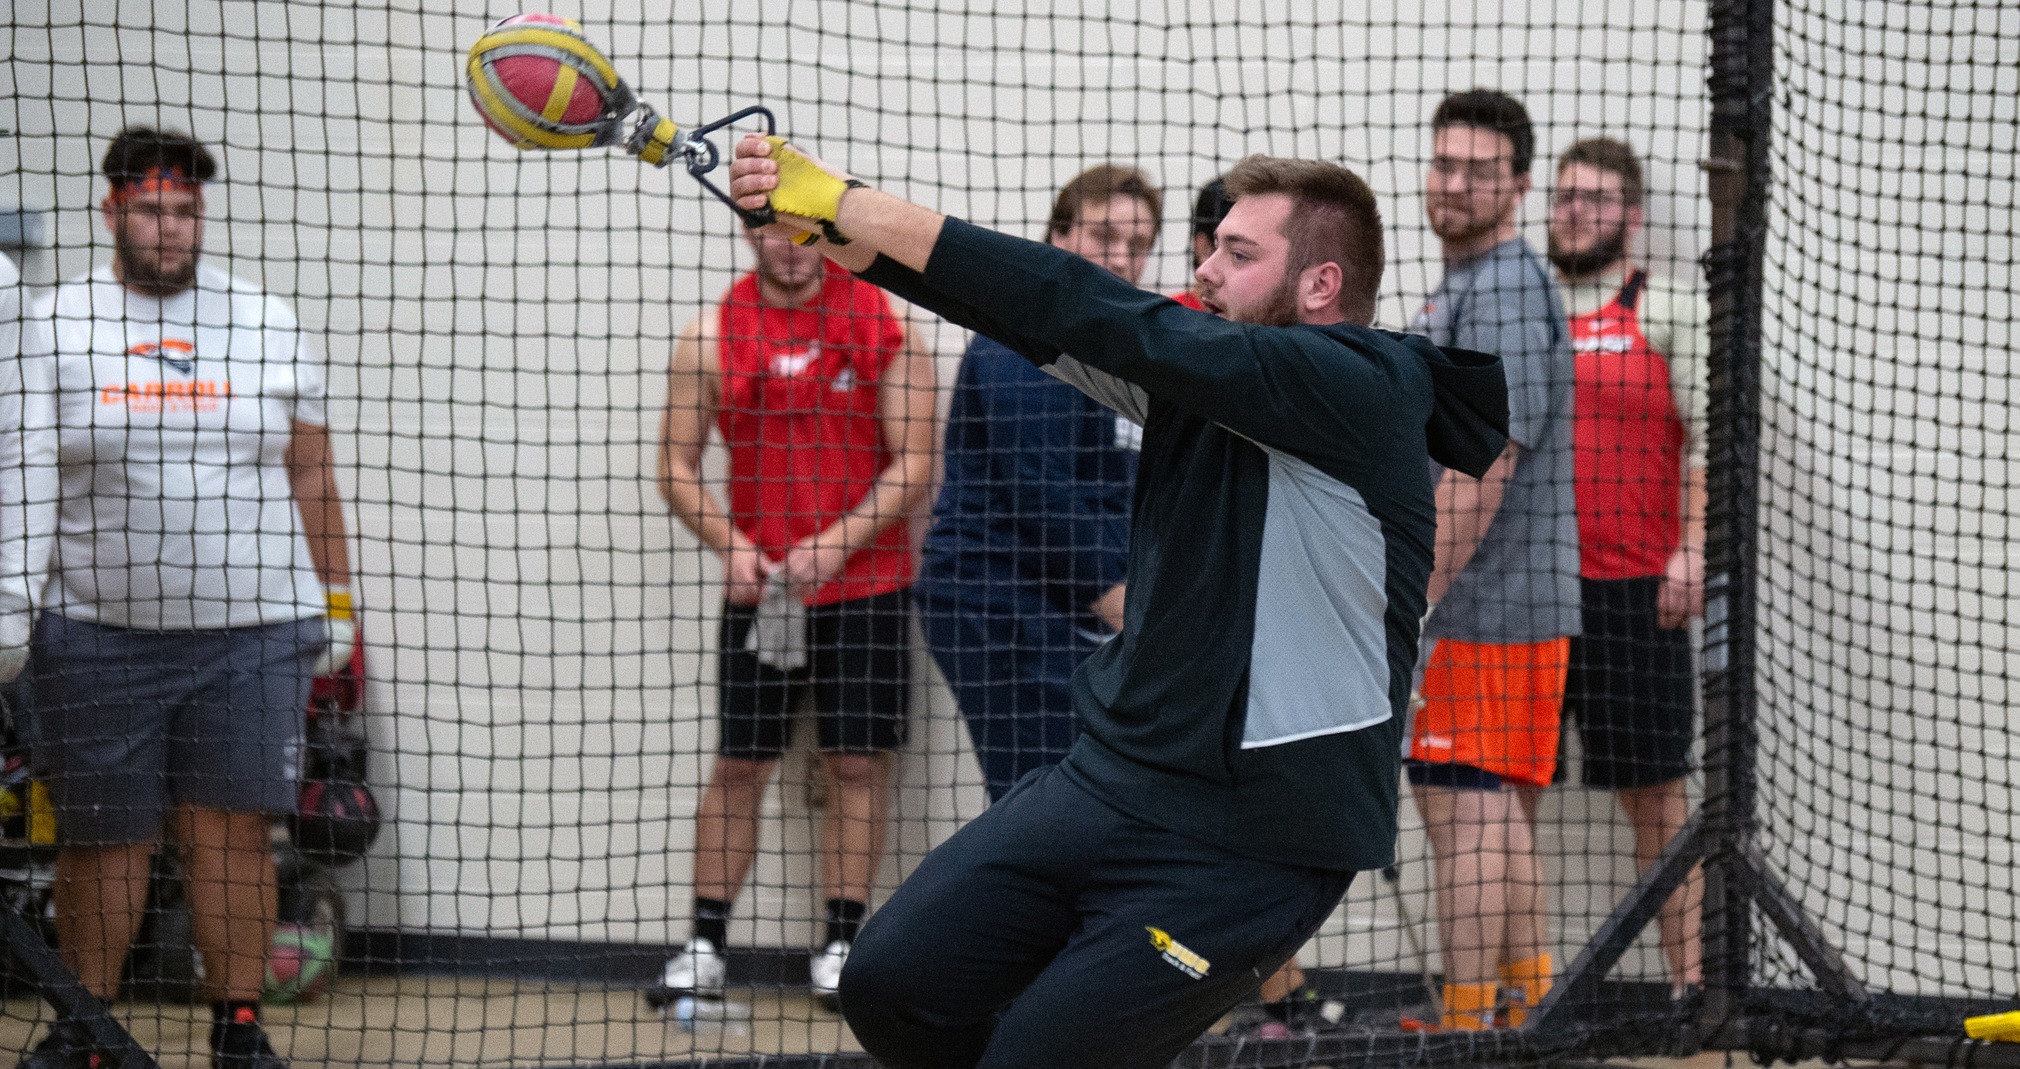 Bailey Quinn won the 35-pound weight throw with a distance of 54-9 1/2 at the UW-Oshkosh Early Bird Invitational.